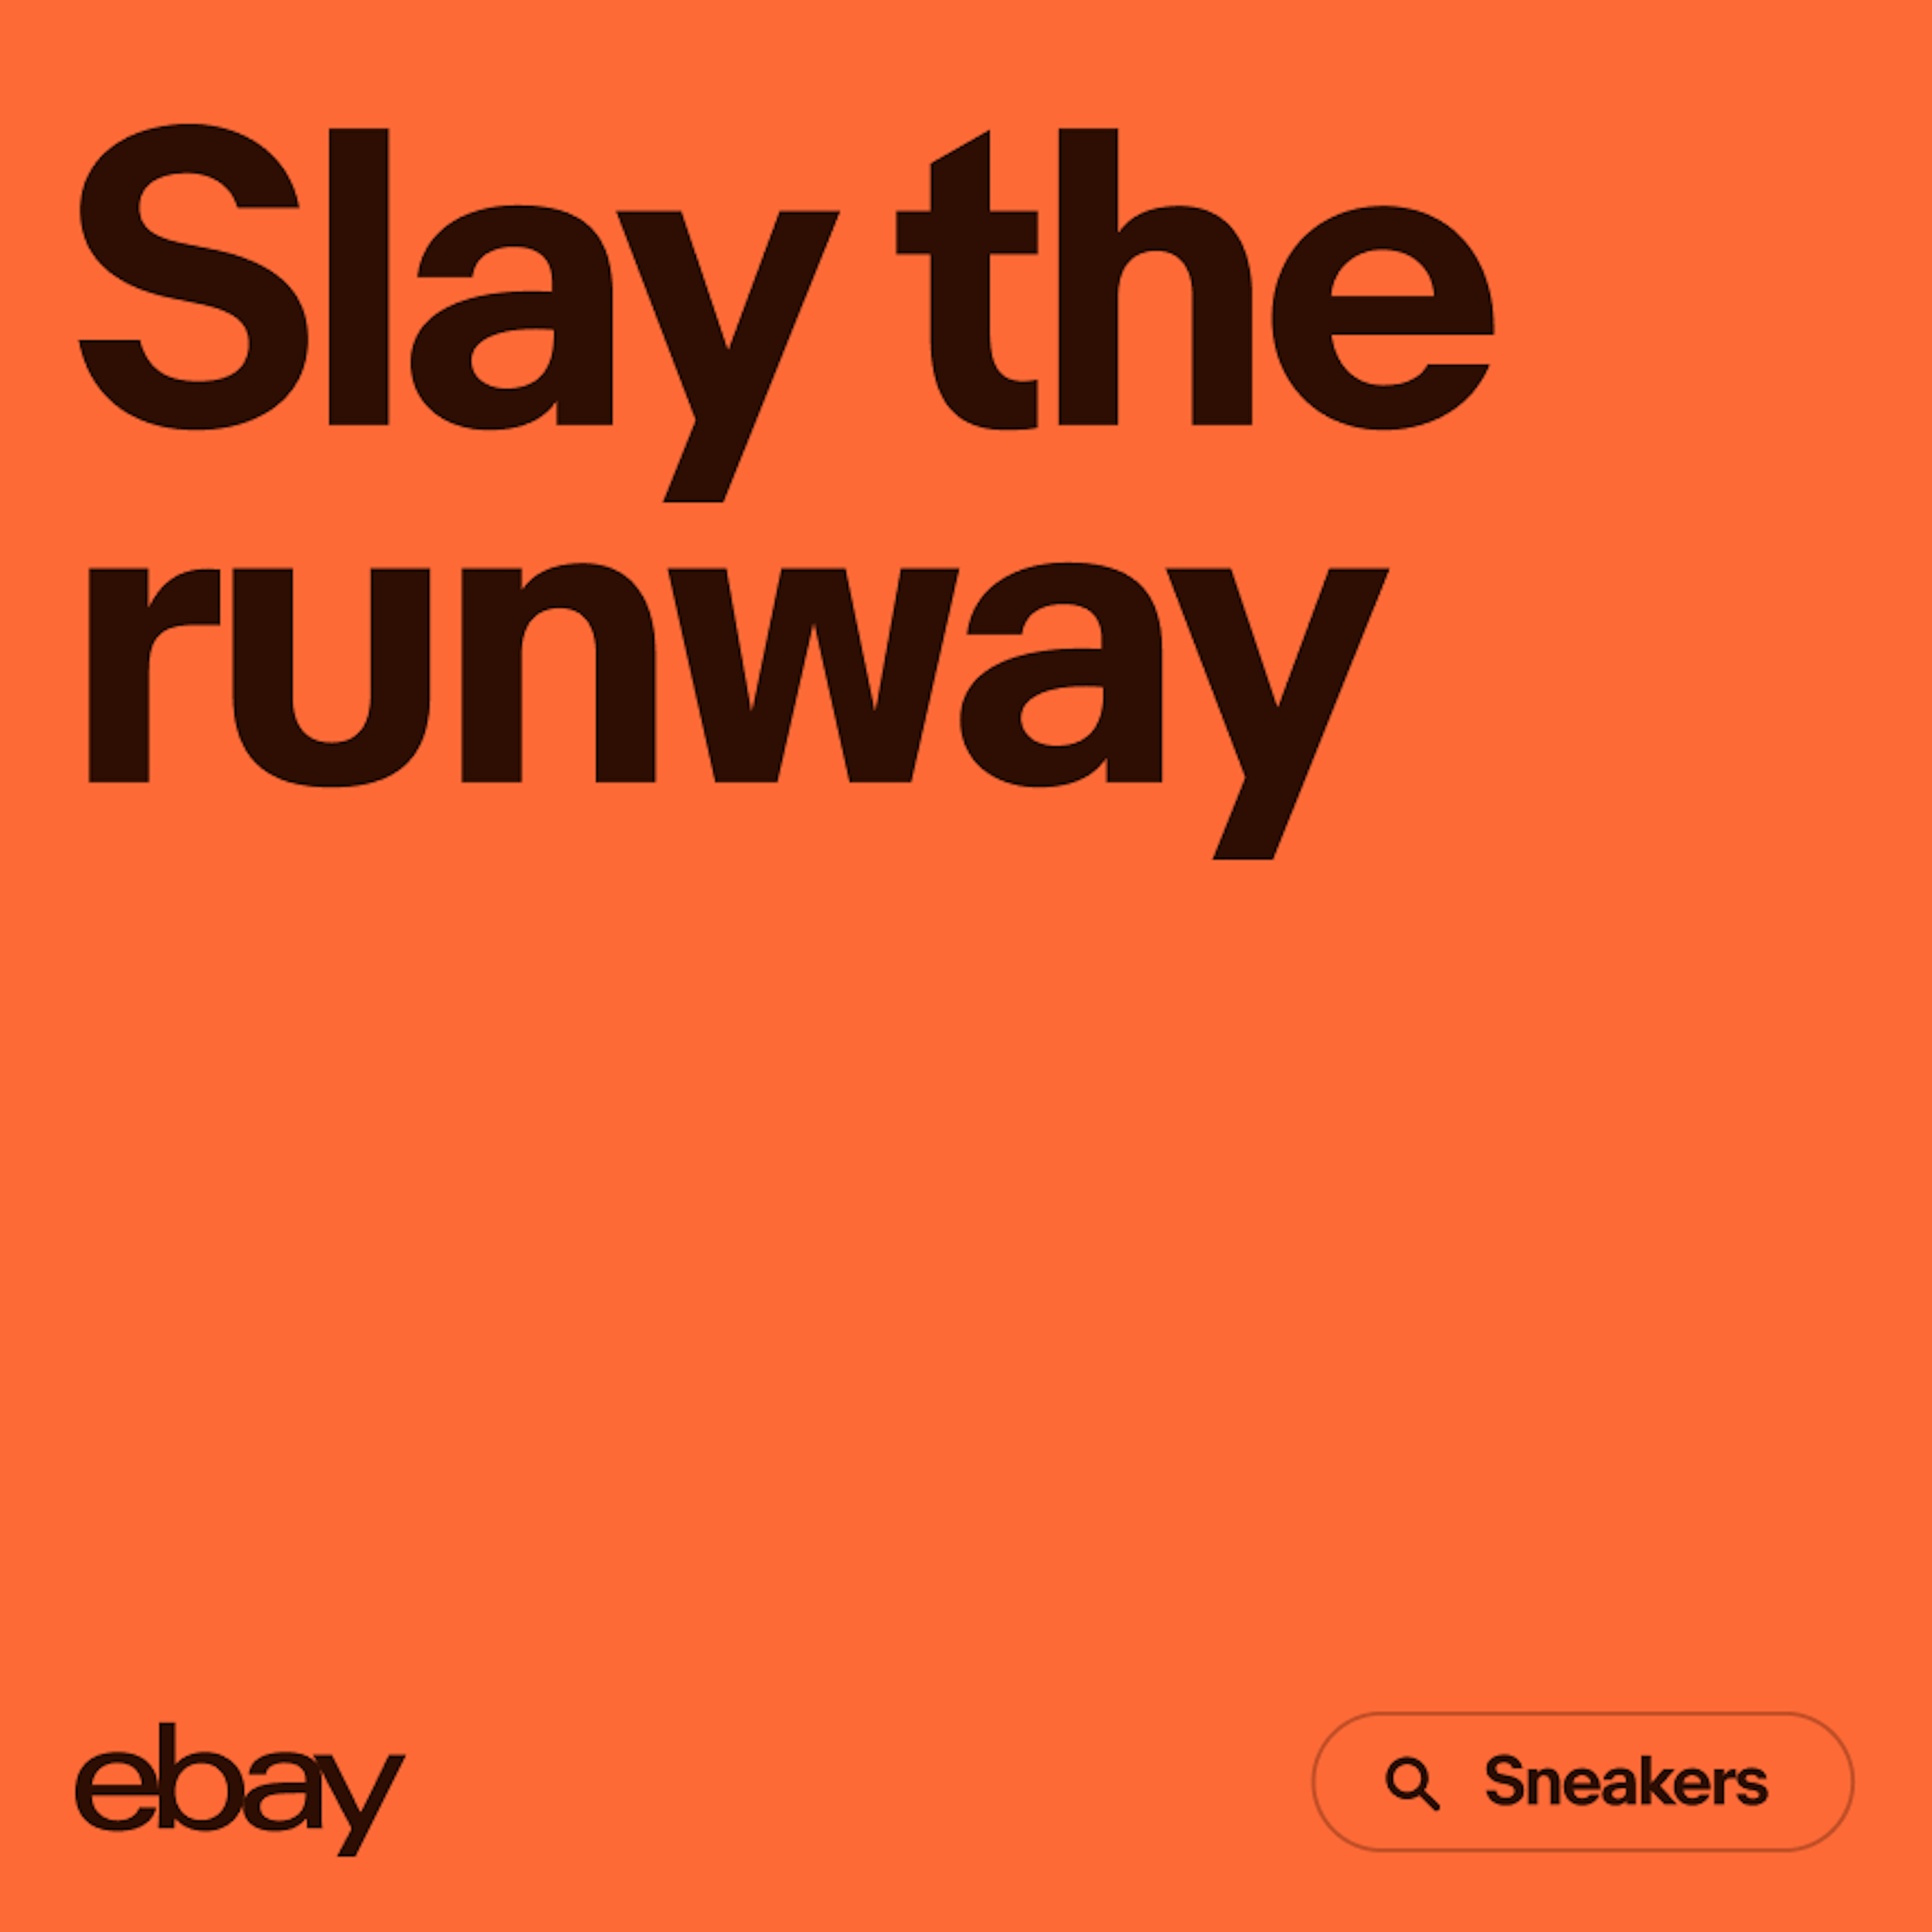 A vibrant orange type-based ad with “Slay the runway” as the headline.